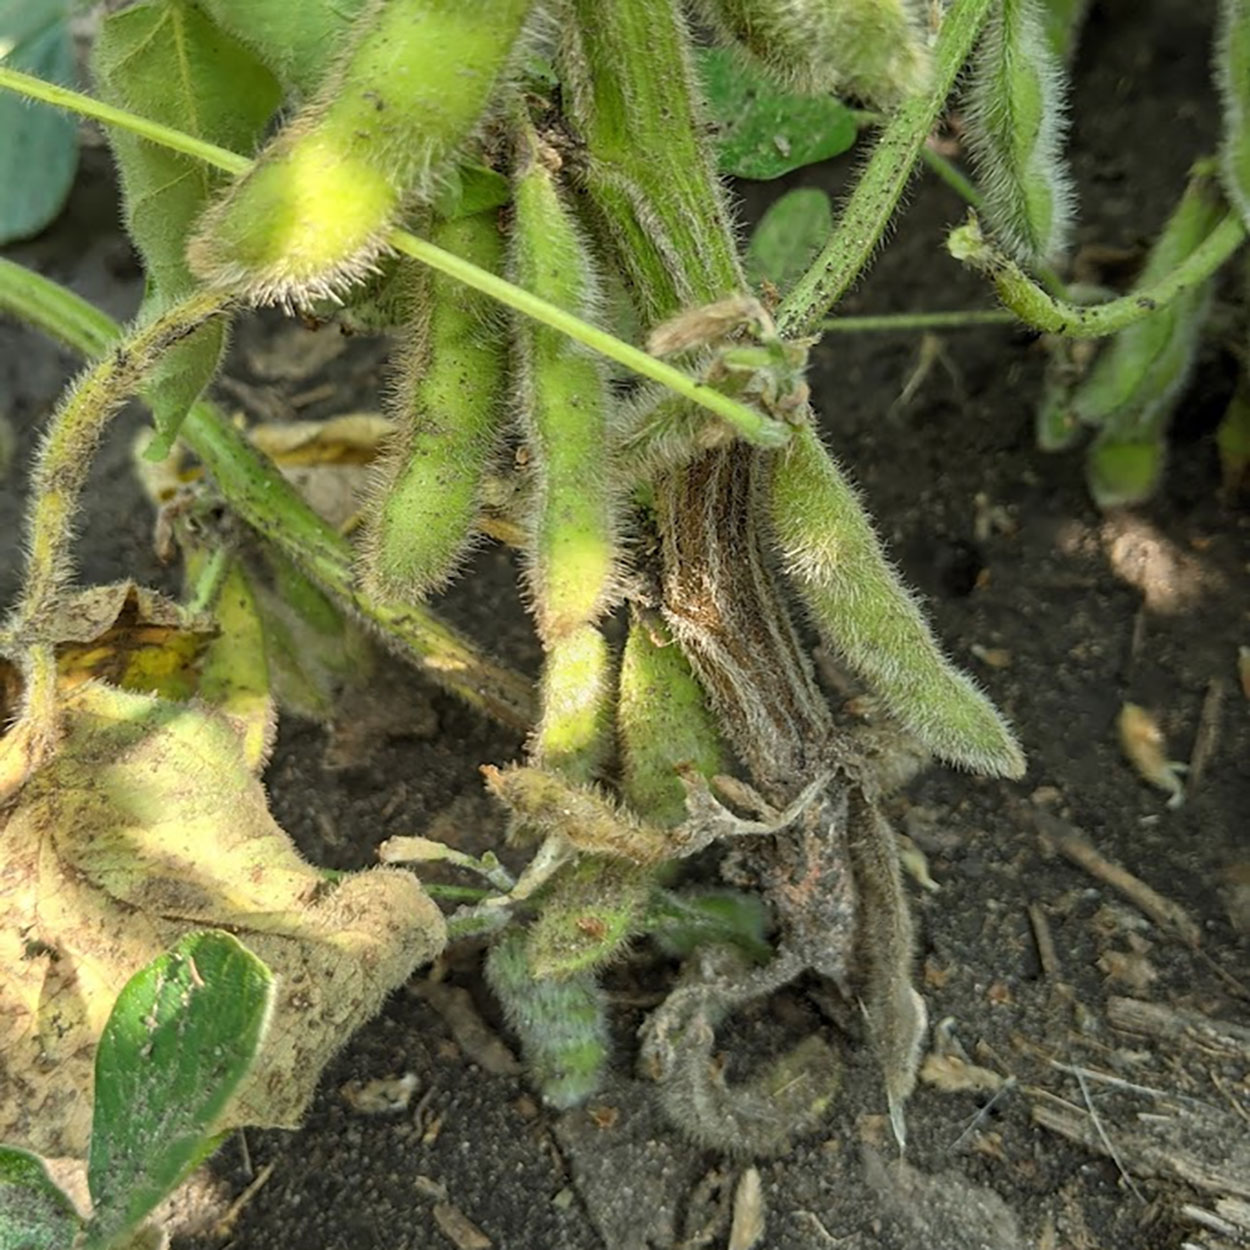 A soybean plant showing a brown lesion of stem canker on the lower part of the stem.